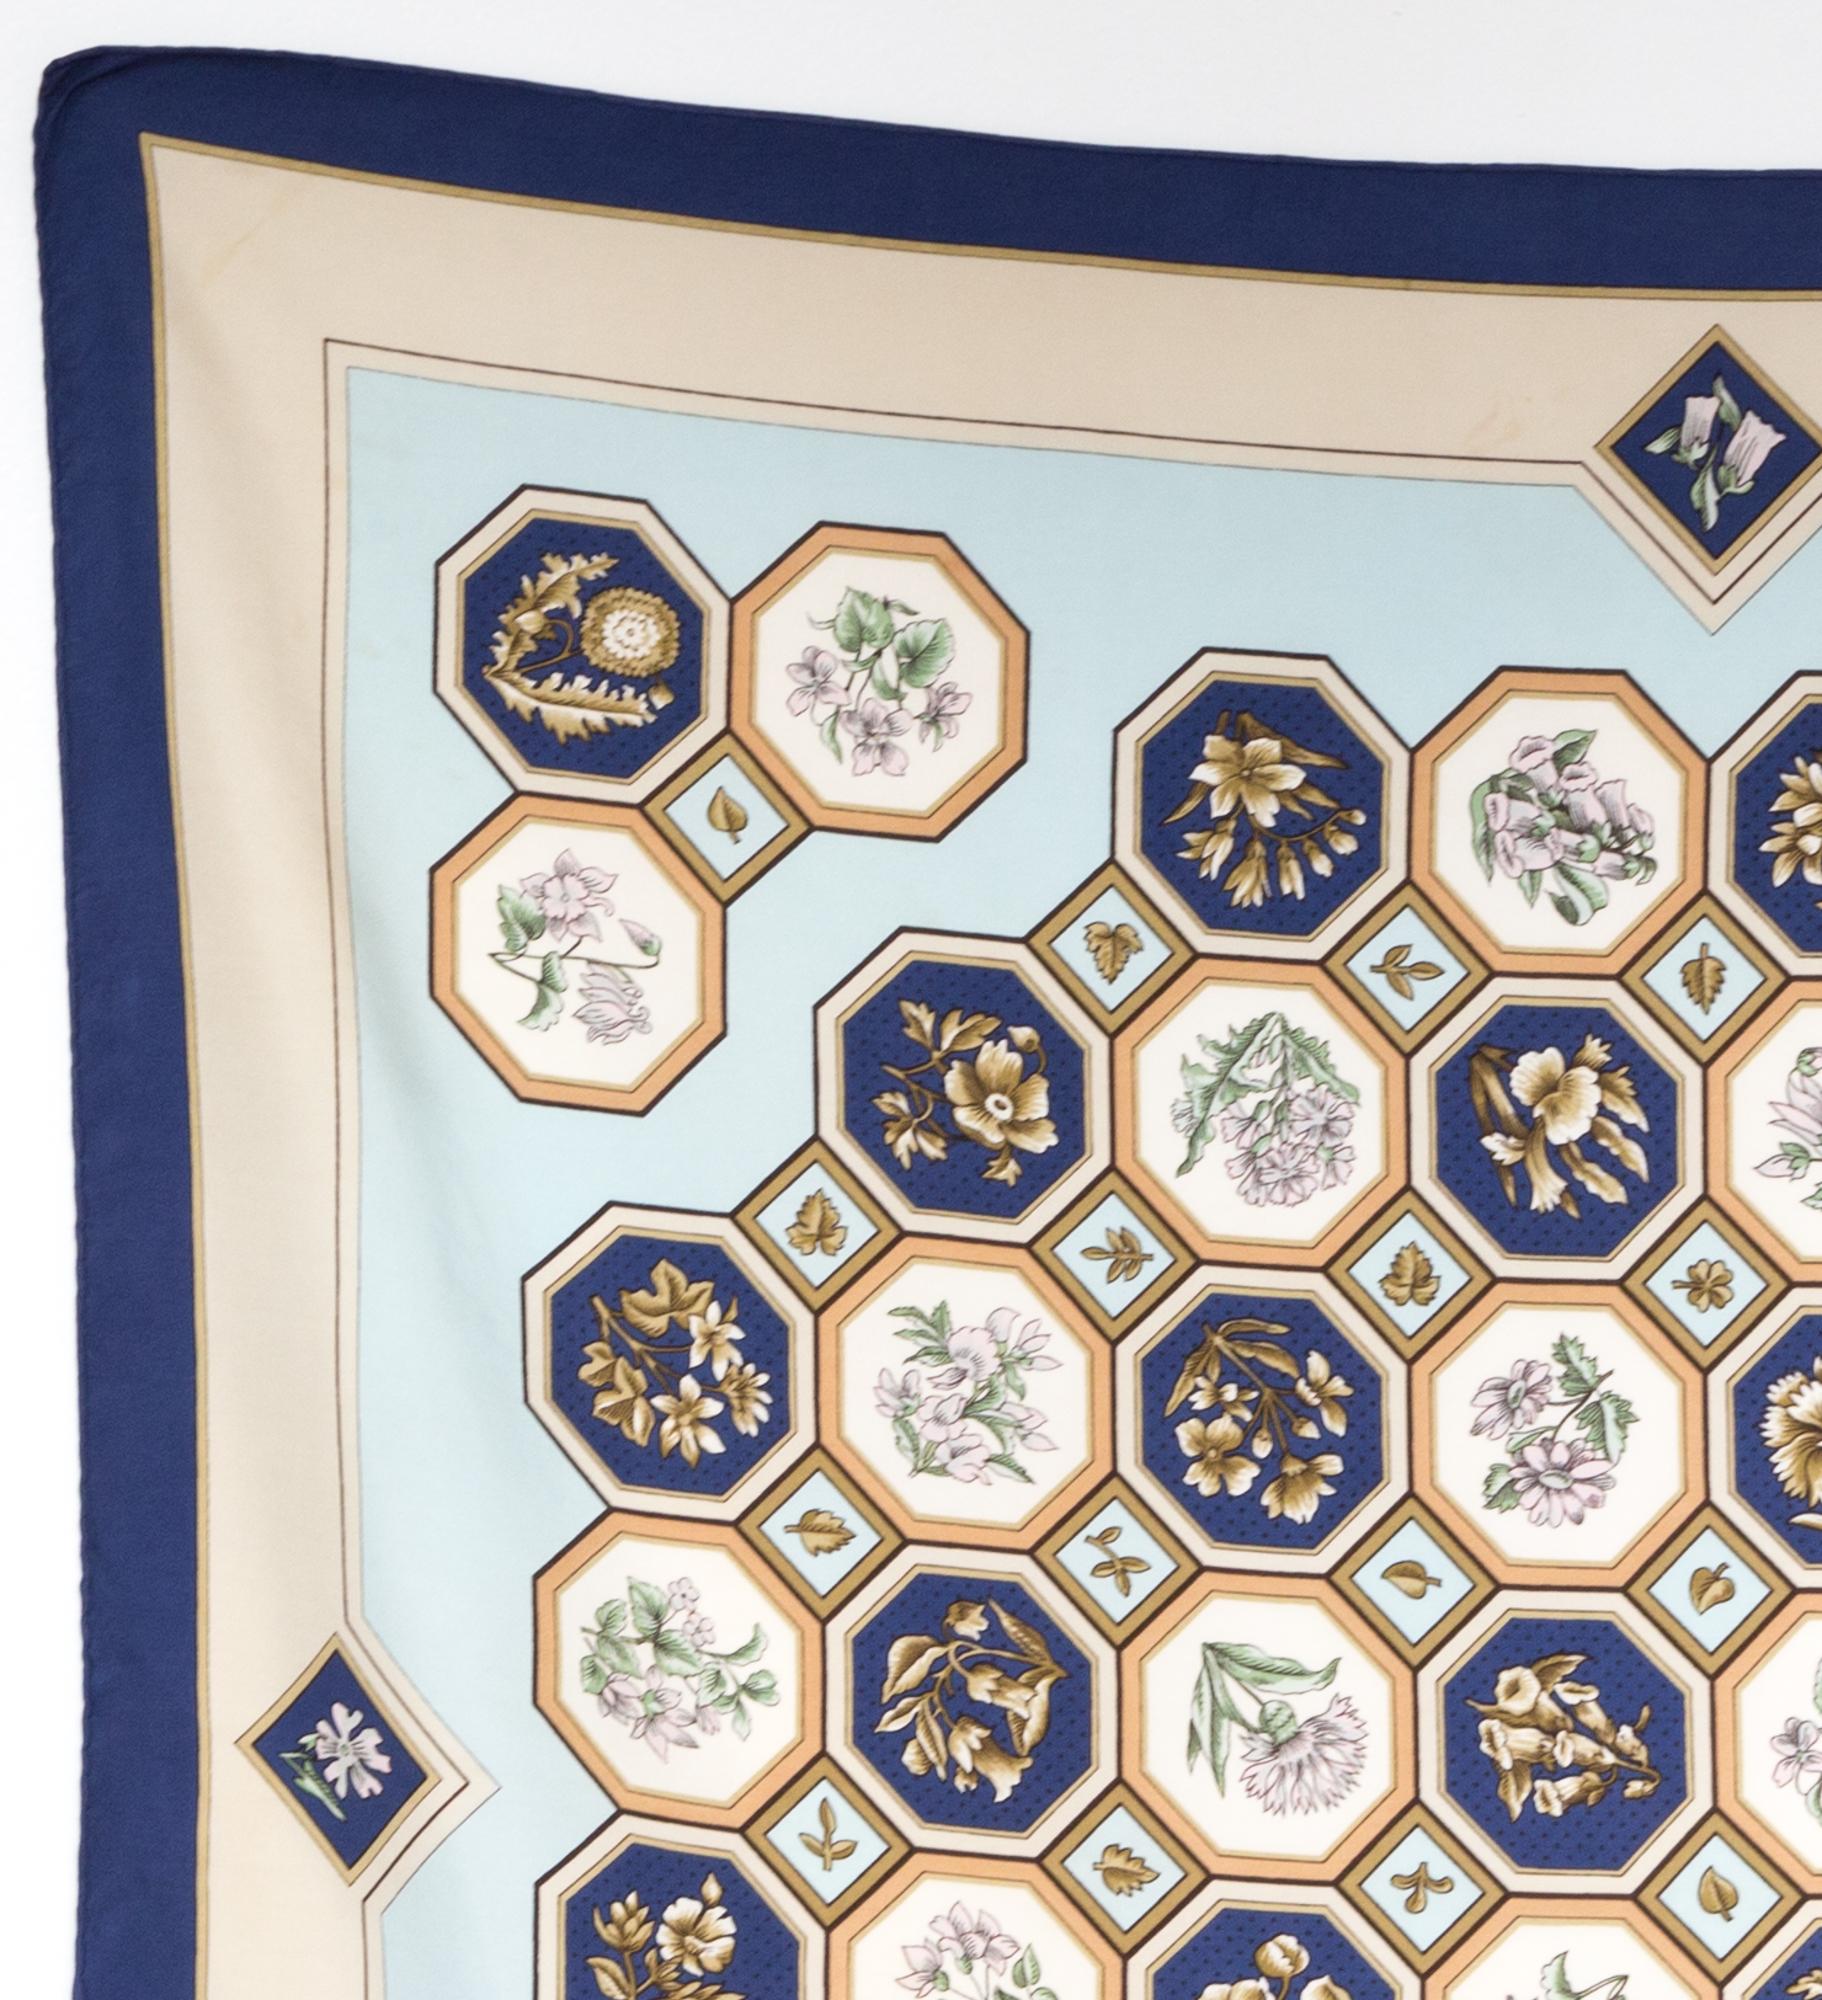 Rare Hermes silk scarf Carrelages by Maurice Tranchant featuring a navy border, a top logo signature. 
In good vintage condition. Made in France.
Only one issue: 1968
35,4in. (90cm)  X 35,4in. (90cm)
We guarantee you will receive this  iconic item